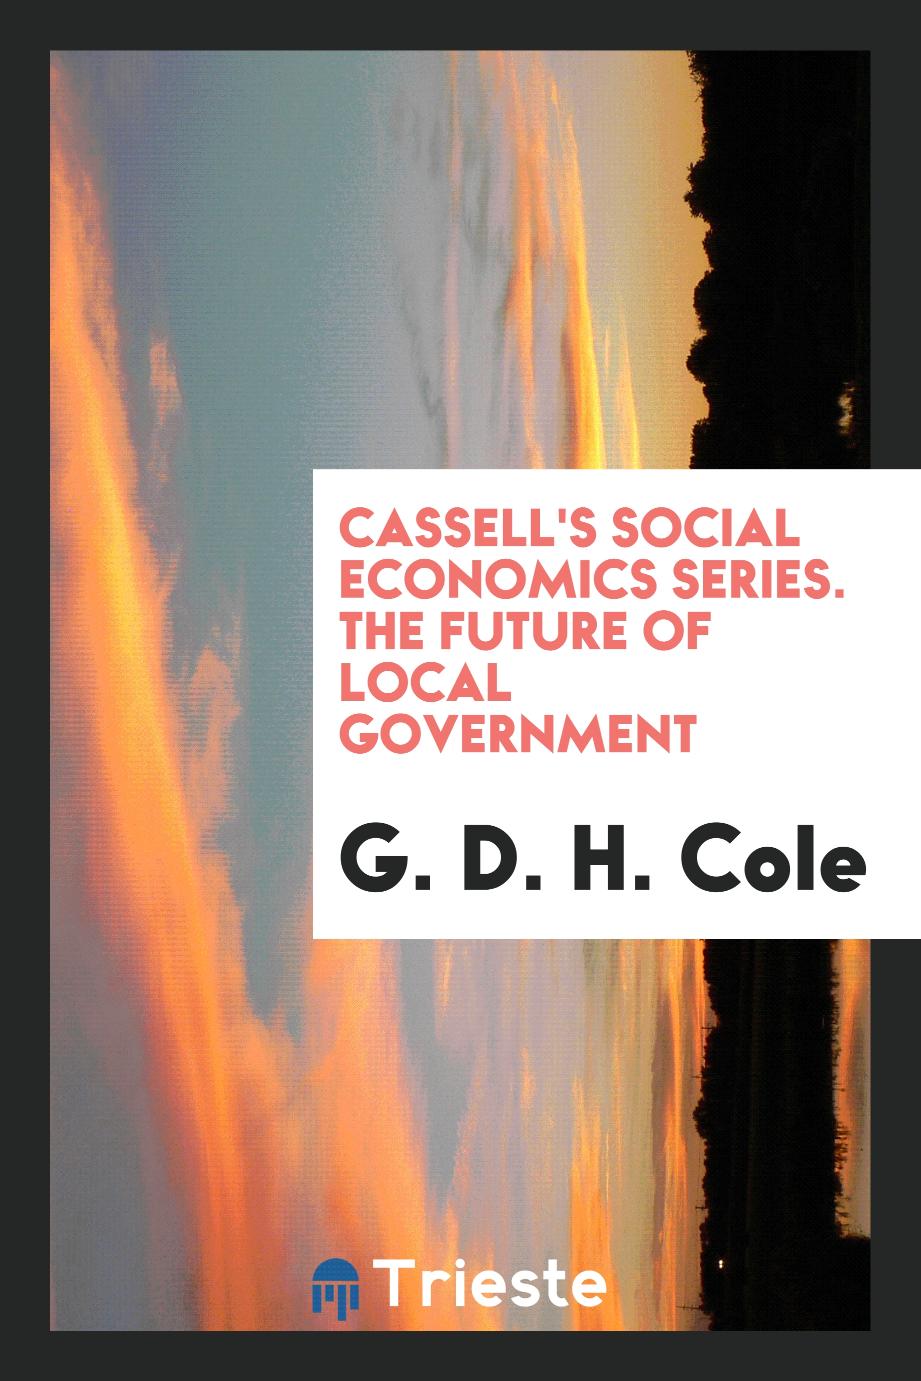 Cassell's social economics series. The future of local government